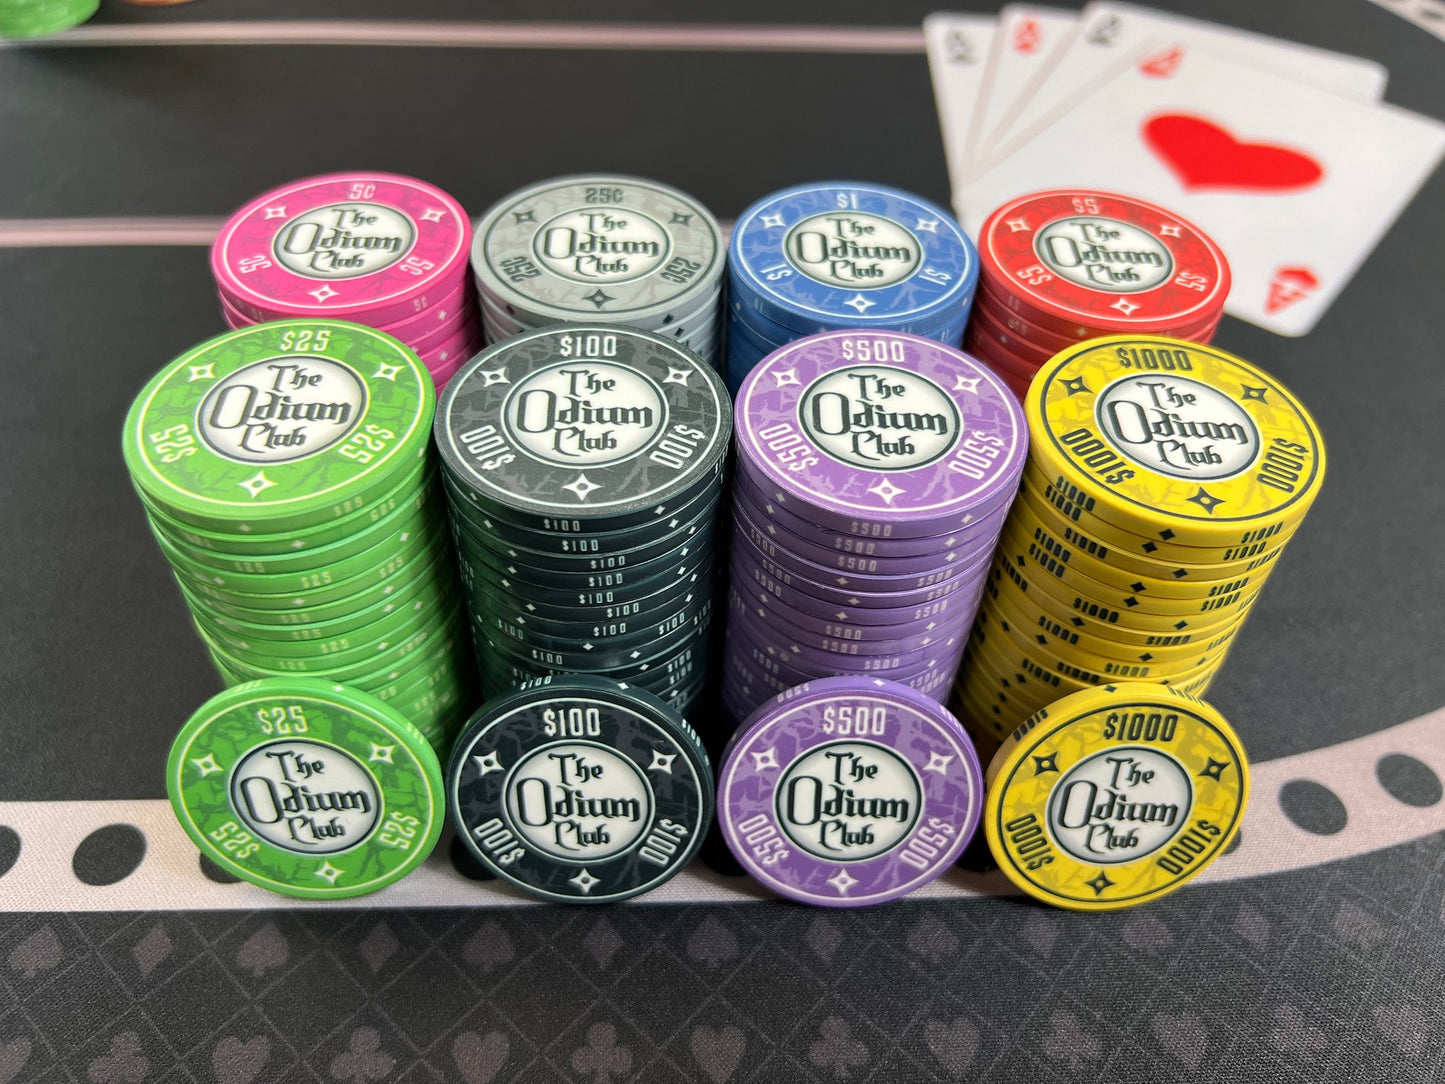 All eight of the stock colors and denominations of the modern-looking Odium Club poker chips in stacks of 20. Both faces are identical. Each side shows the logo and denom. Available in 5¢ pink, 25¢ gray, $1 blue, $5 red, $25 green, $100 black, $500 purple, and $1000 yellow. Shown up front: twenty-five dollar green, one-hundred dollar black, five-hundred dollar purple, and one thousand dollar yellow.